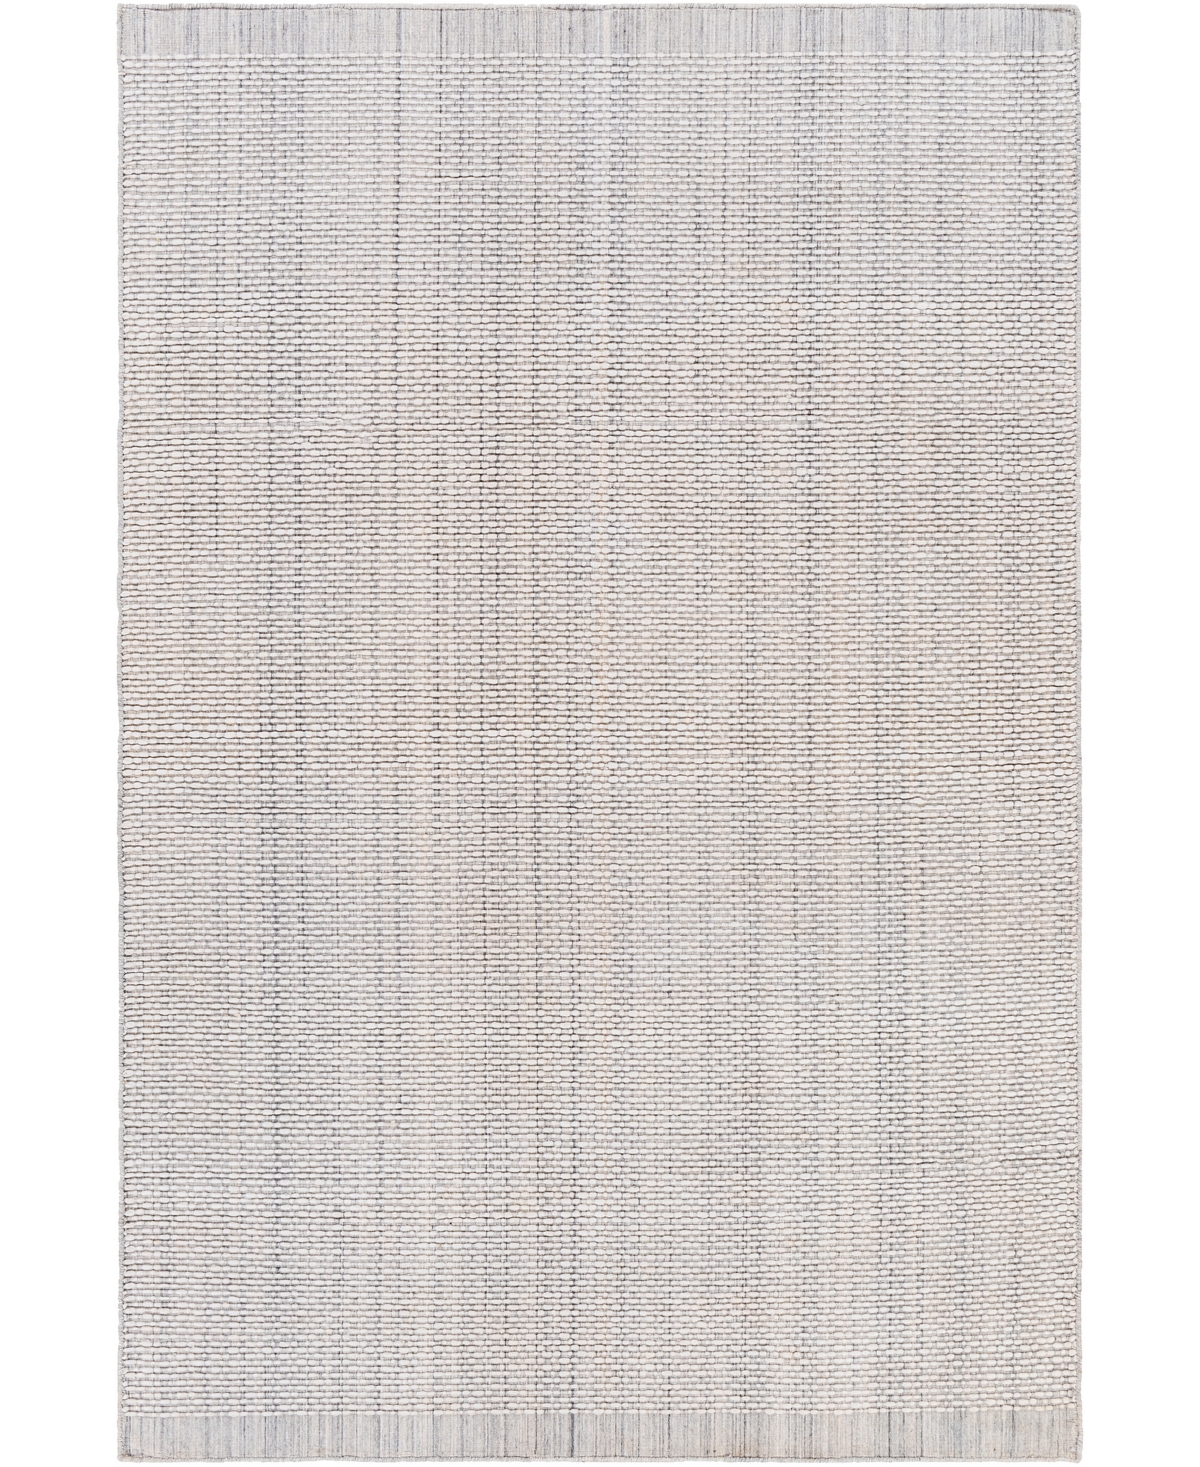 Surya Sycamore Syc-2300 5in x 7'6in Outdoor Area Rug - White, Gray